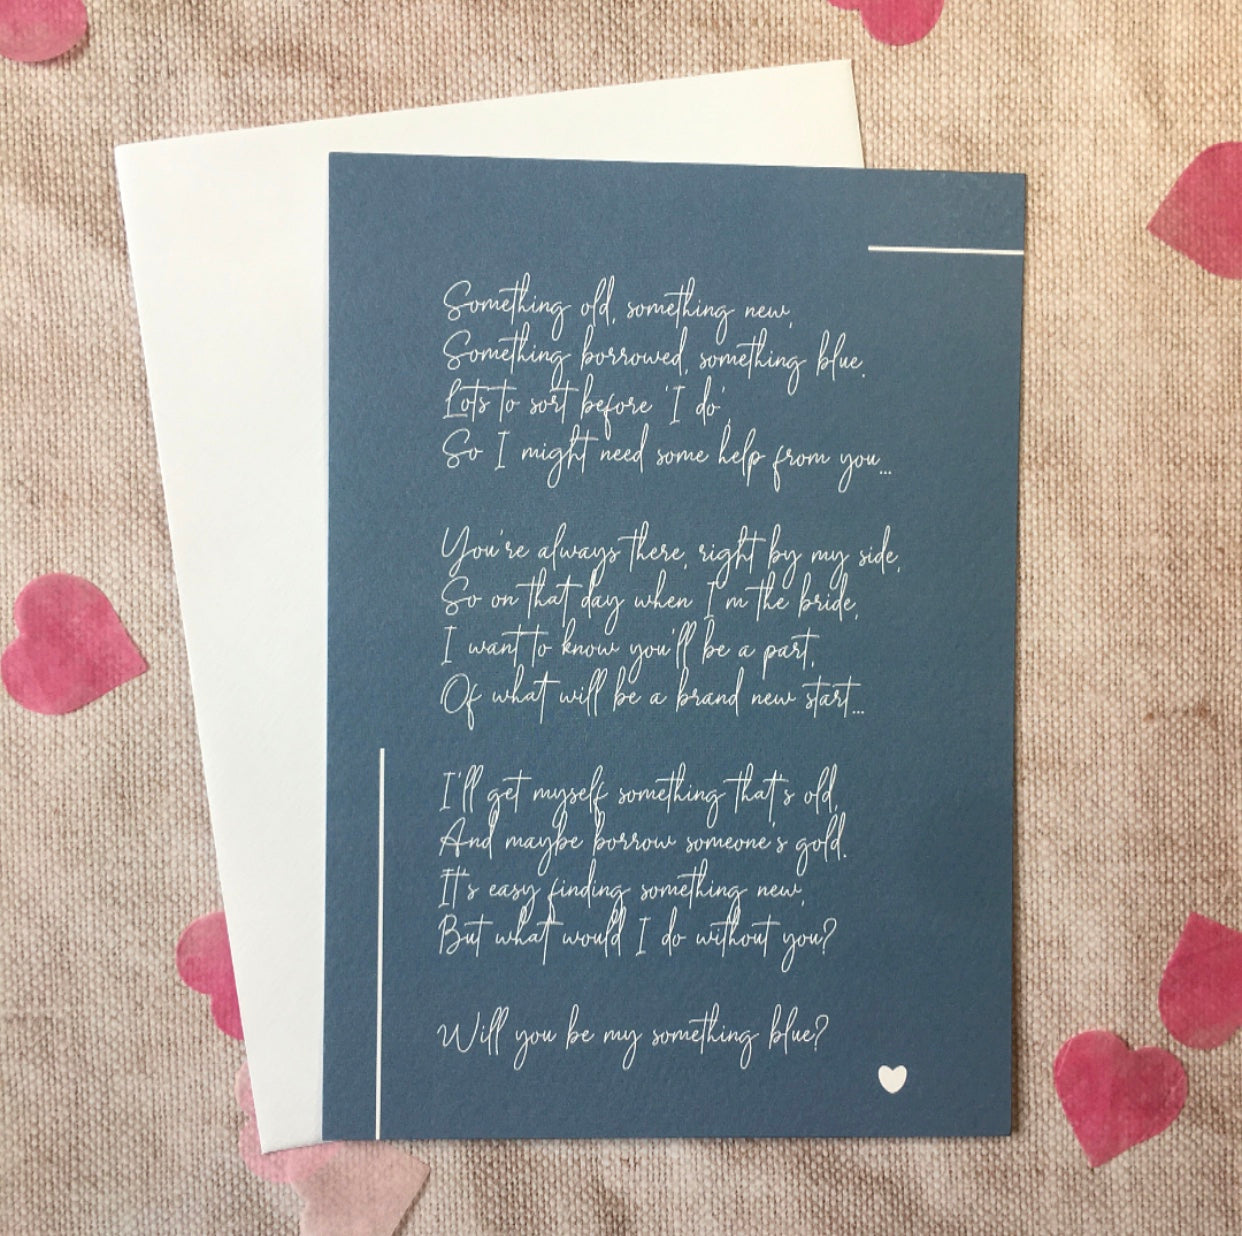 'Will you be my something blue?' 💙 Printed Poem